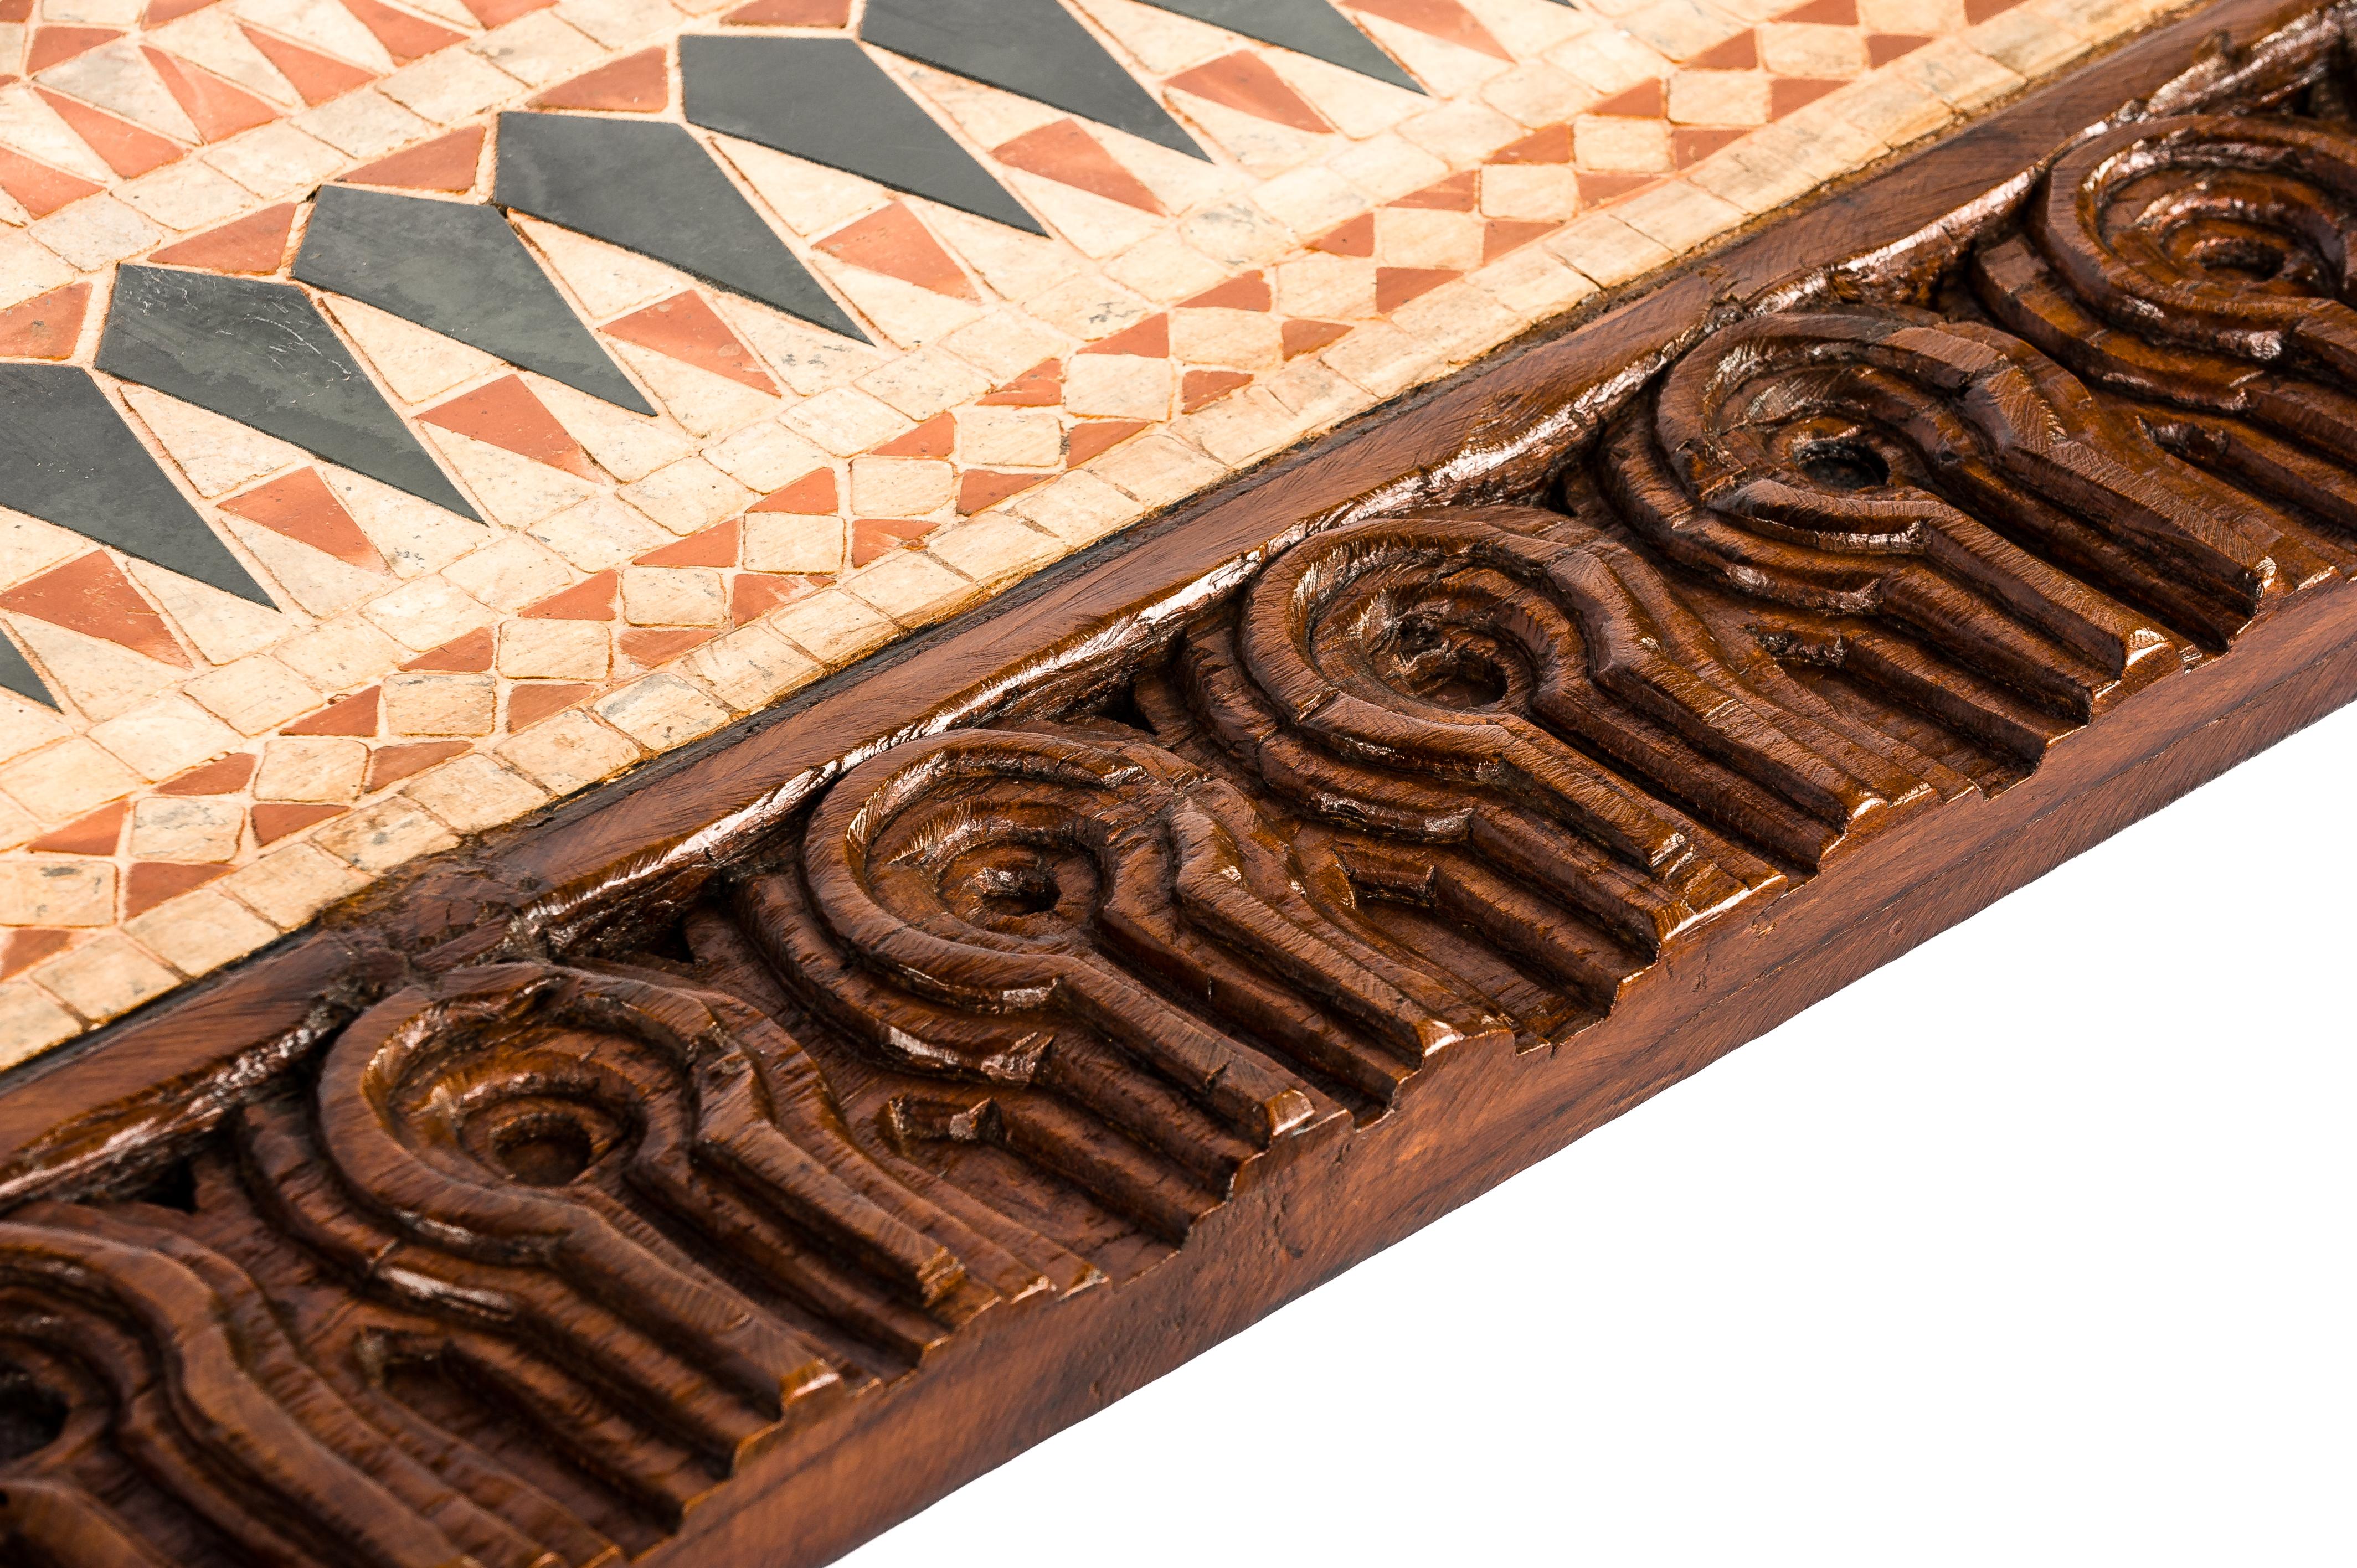 Mid-20th Century Mid-Century Spanish Chestnut Hand-Carved Coffee Table with Geometric Tile Panel